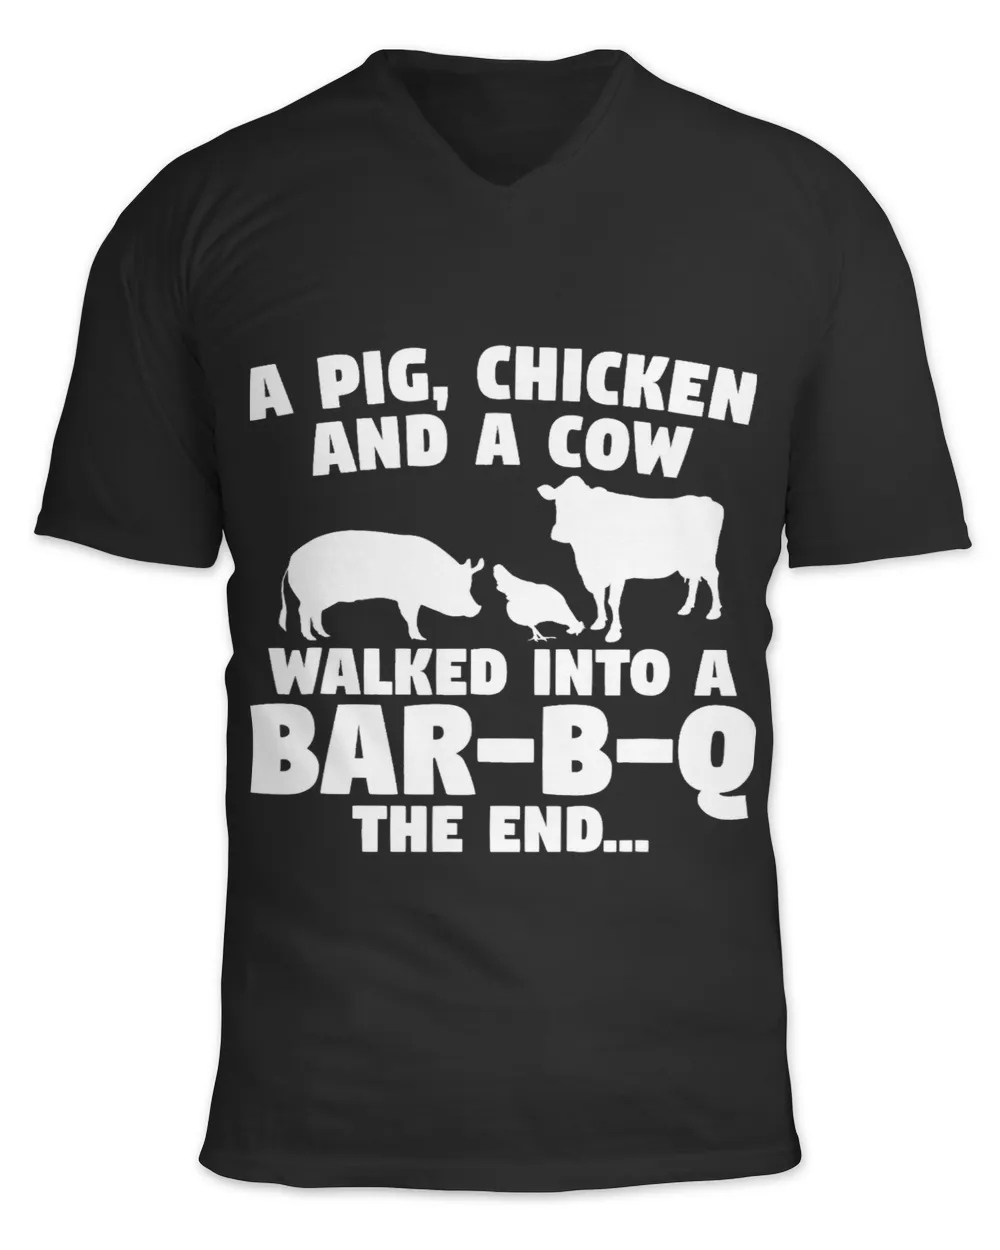 Chickens A Pig Chicken And A Cow Walked Into A BarBQ The End